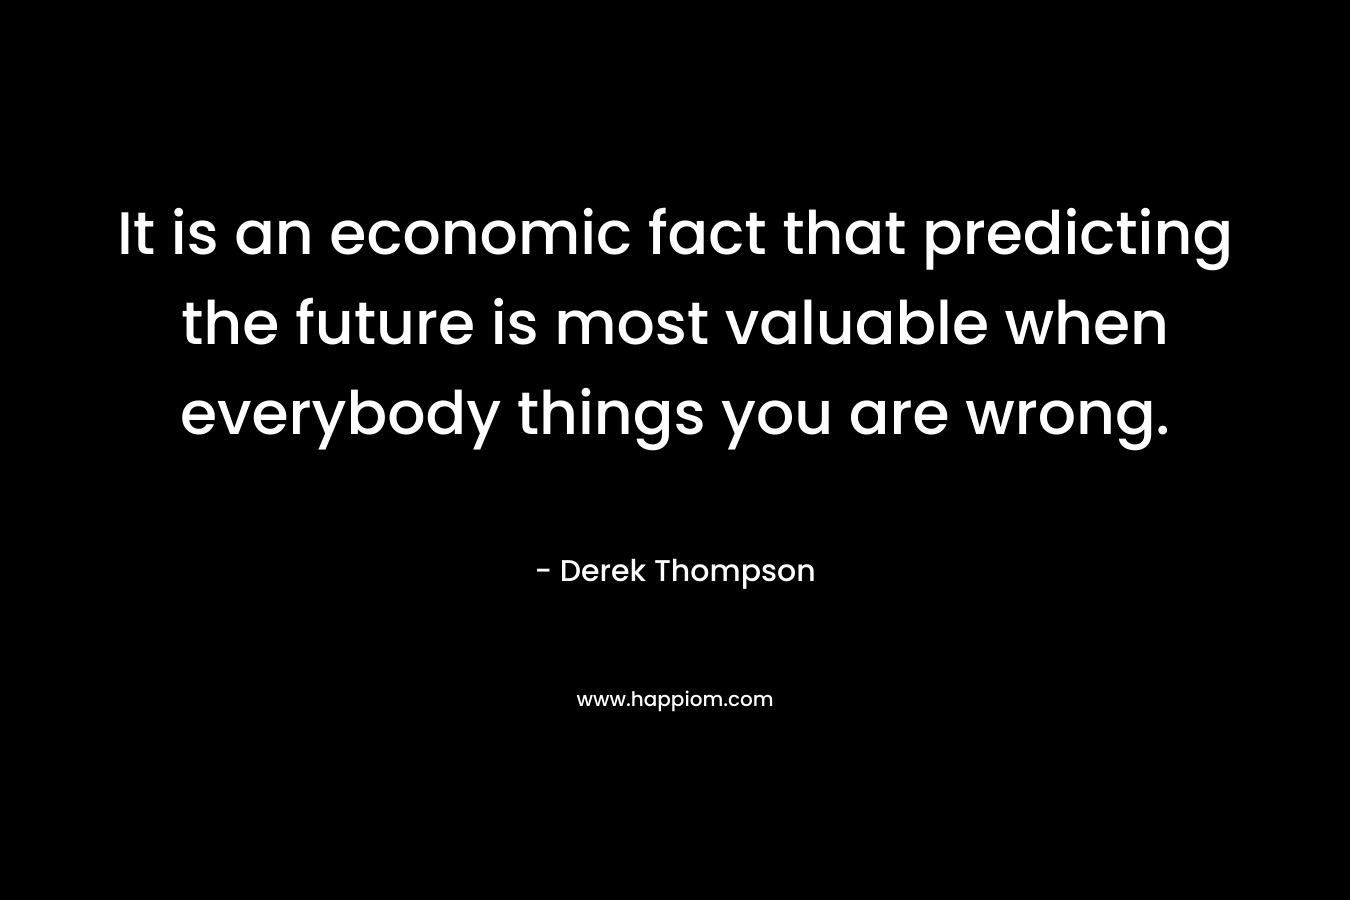 It is an economic fact that predicting the future is most valuable when everybody things you are wrong. – Derek Thompson